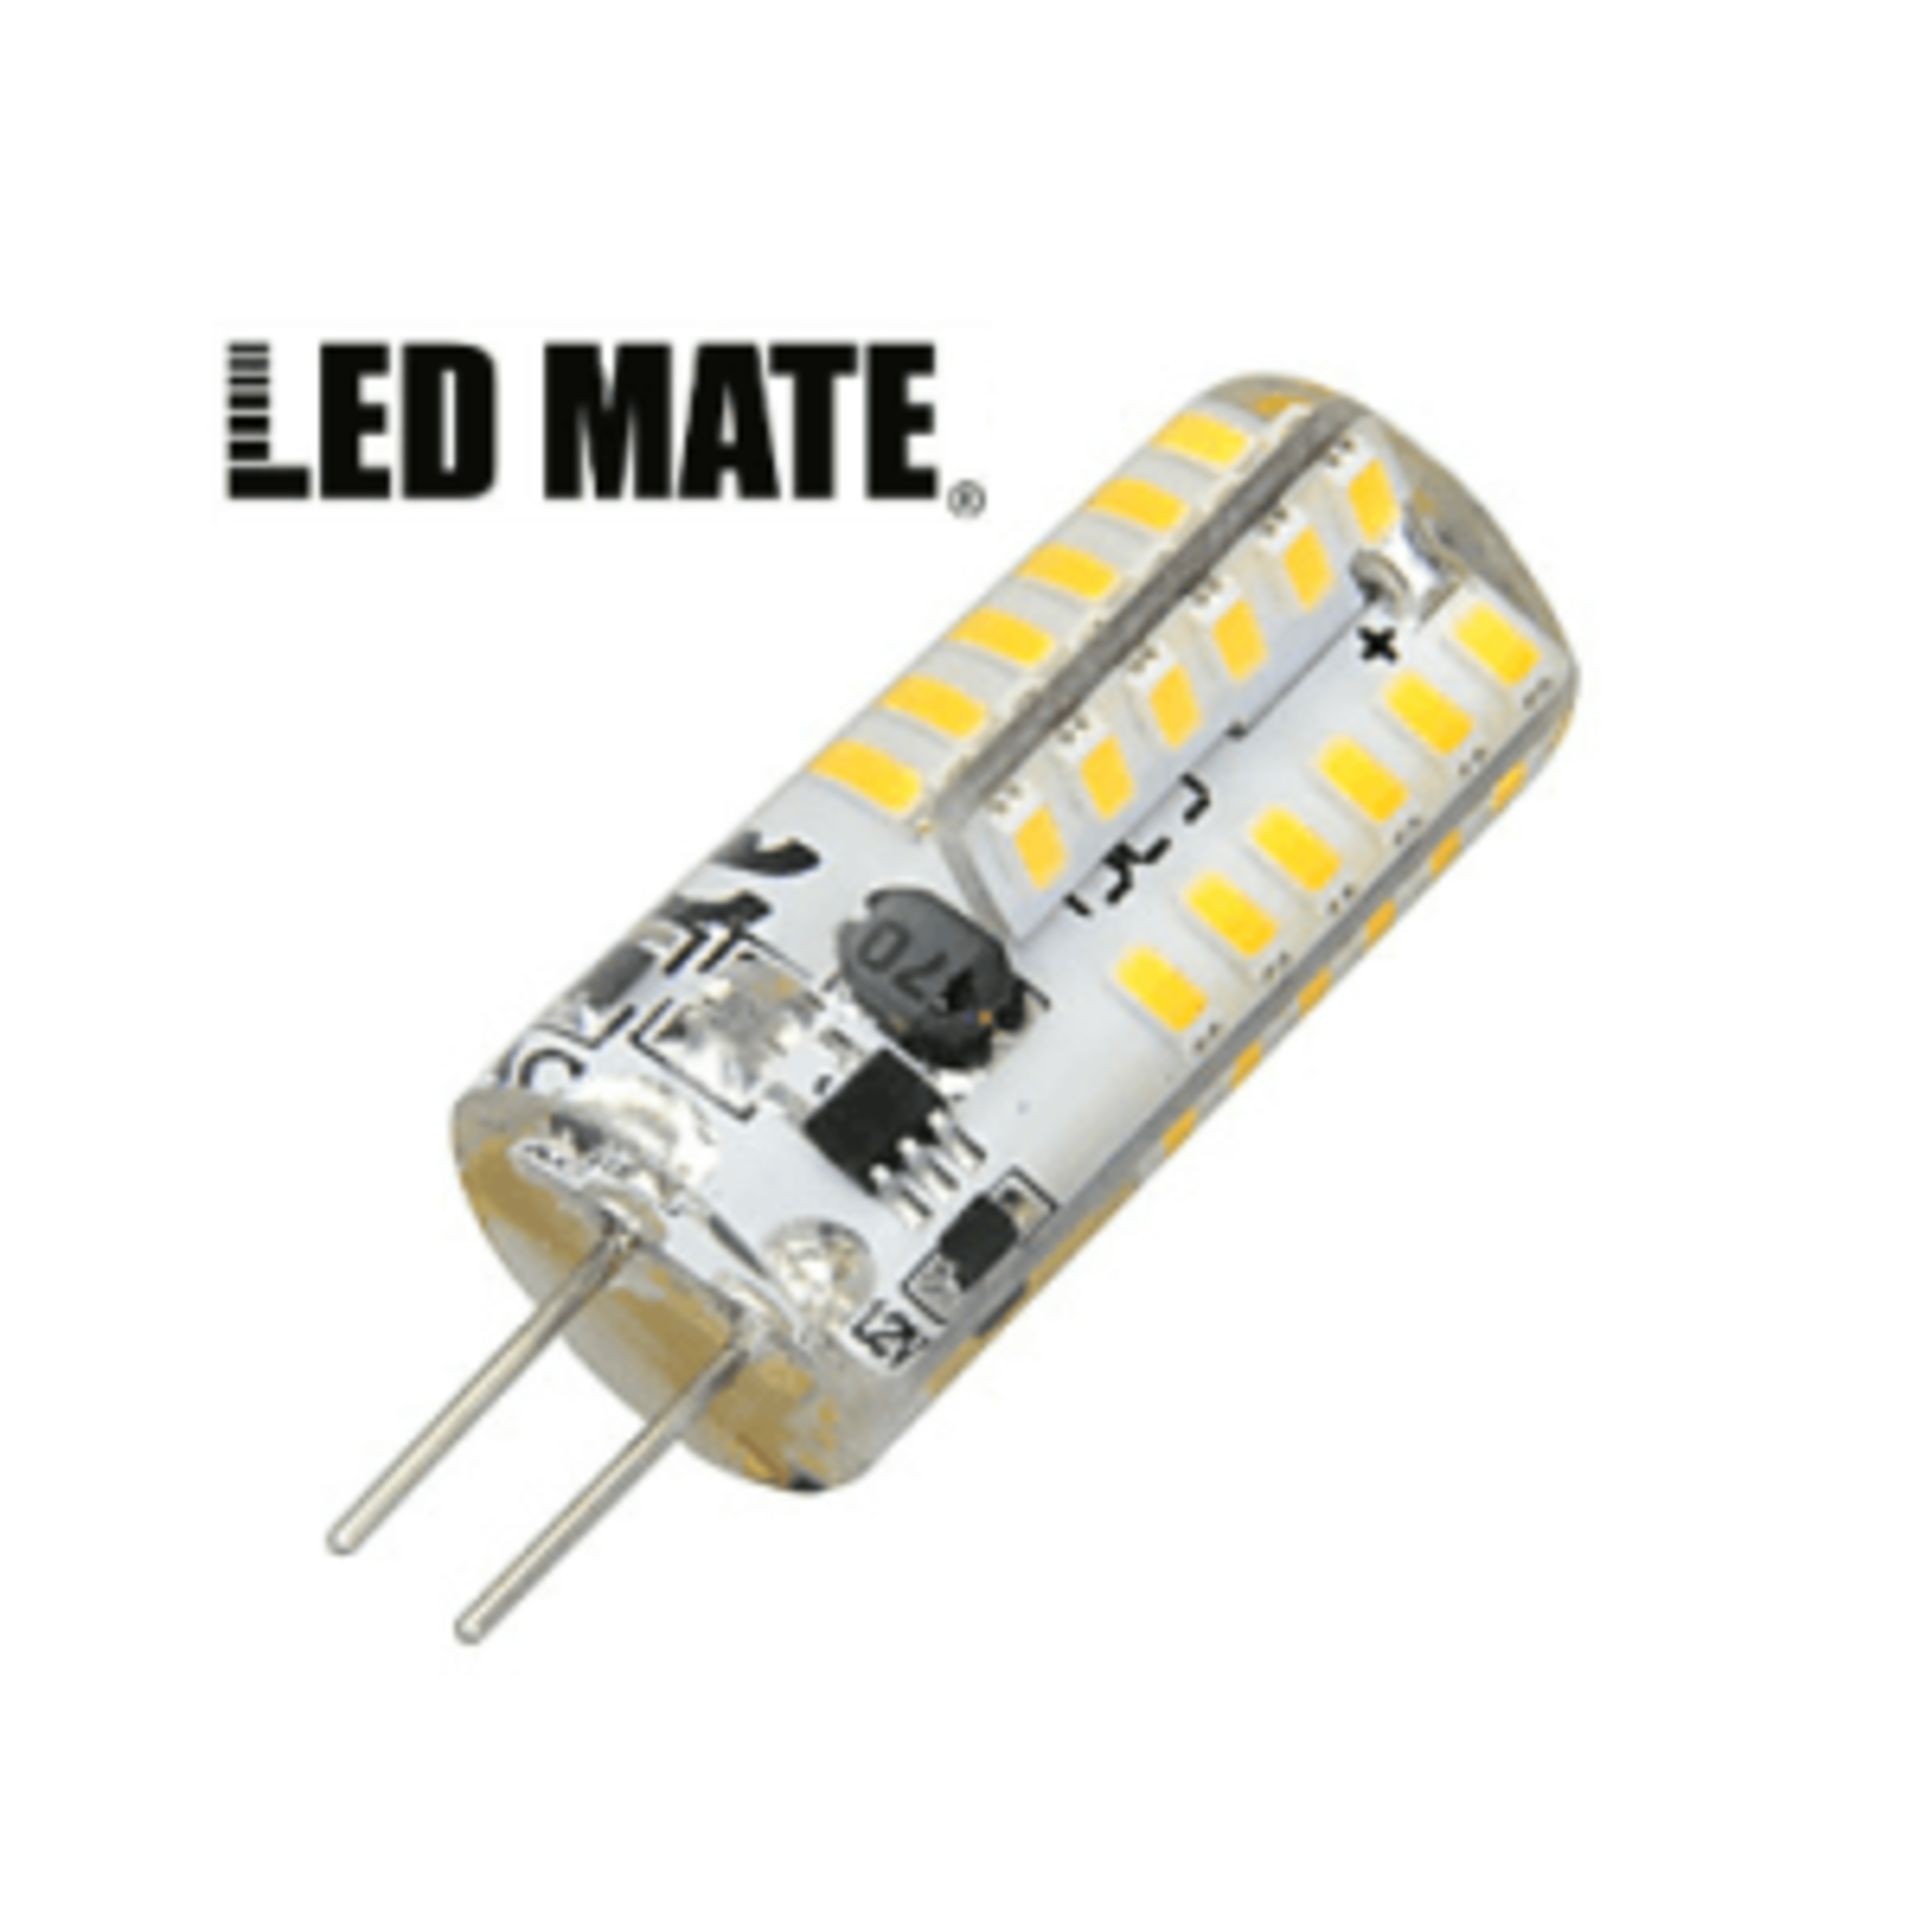 1000 LEDMATE brand G4 LED's. Each LED is individually boxed. 100 pieces in a box. 10 Boxes supplied